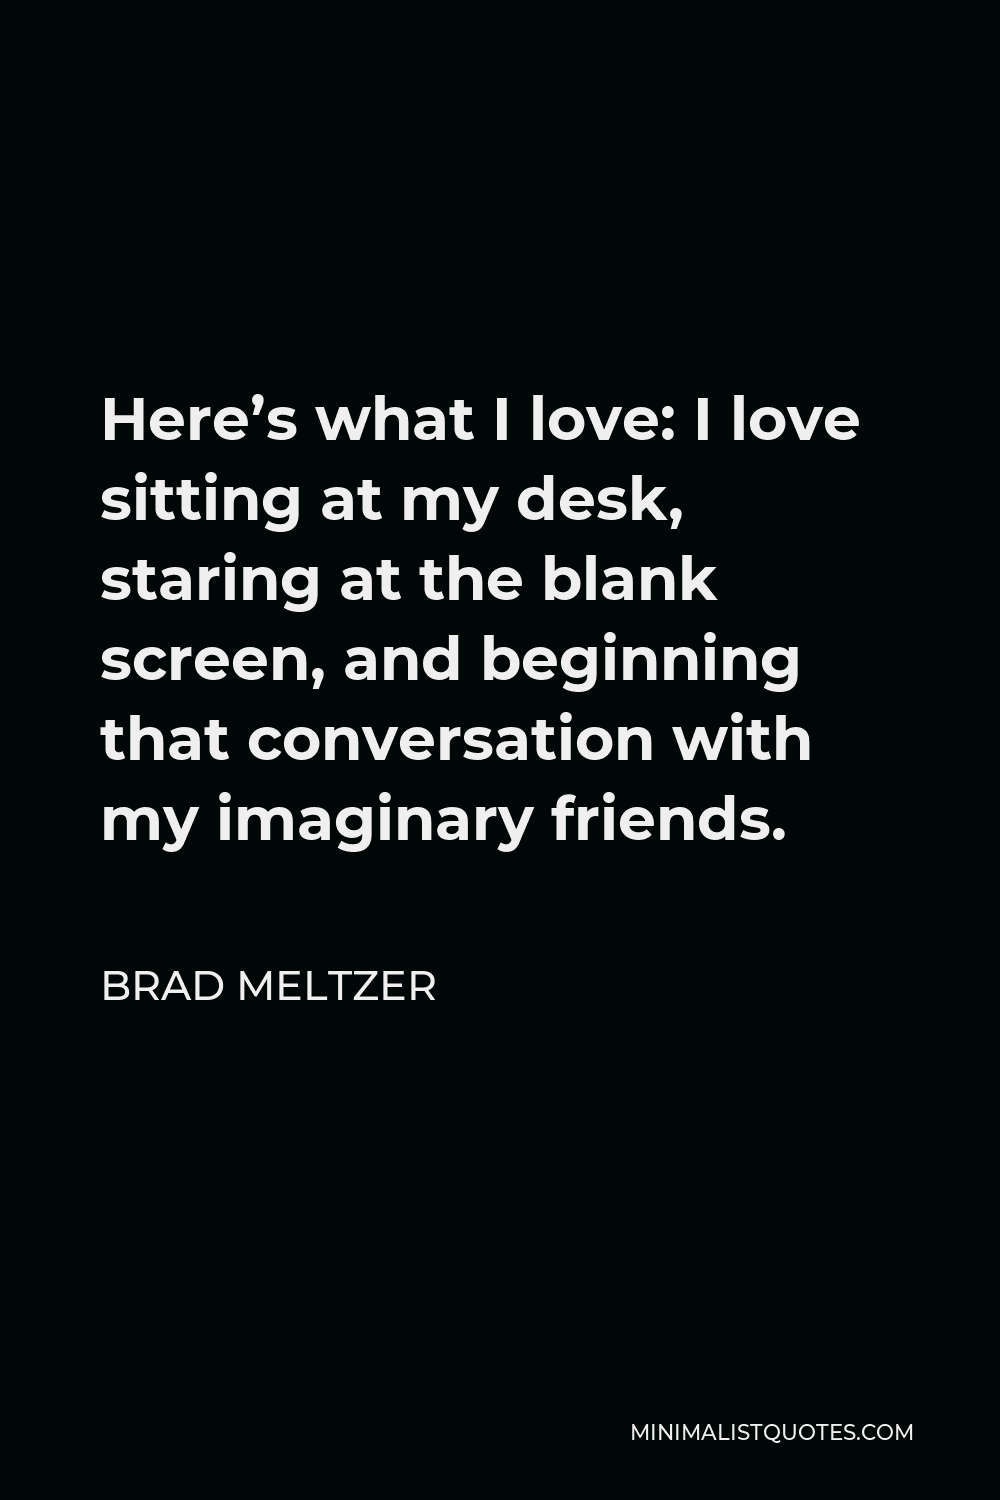 Brad Meltzer Quote - Here’s what I love: I love sitting at my desk, staring at the blank screen, and beginning that conversation with my imaginary friends.